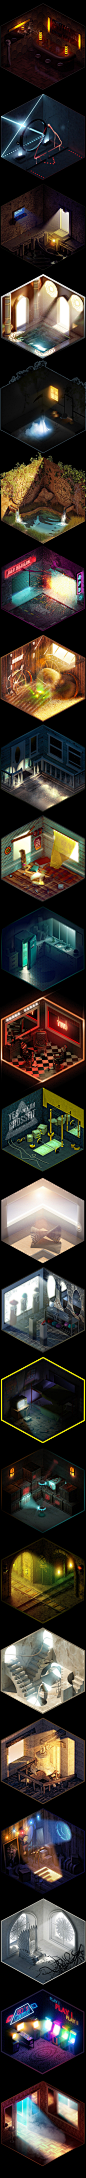 Isometric Rooms With Stories V.3 : Isometric Rooms With Stories V.2